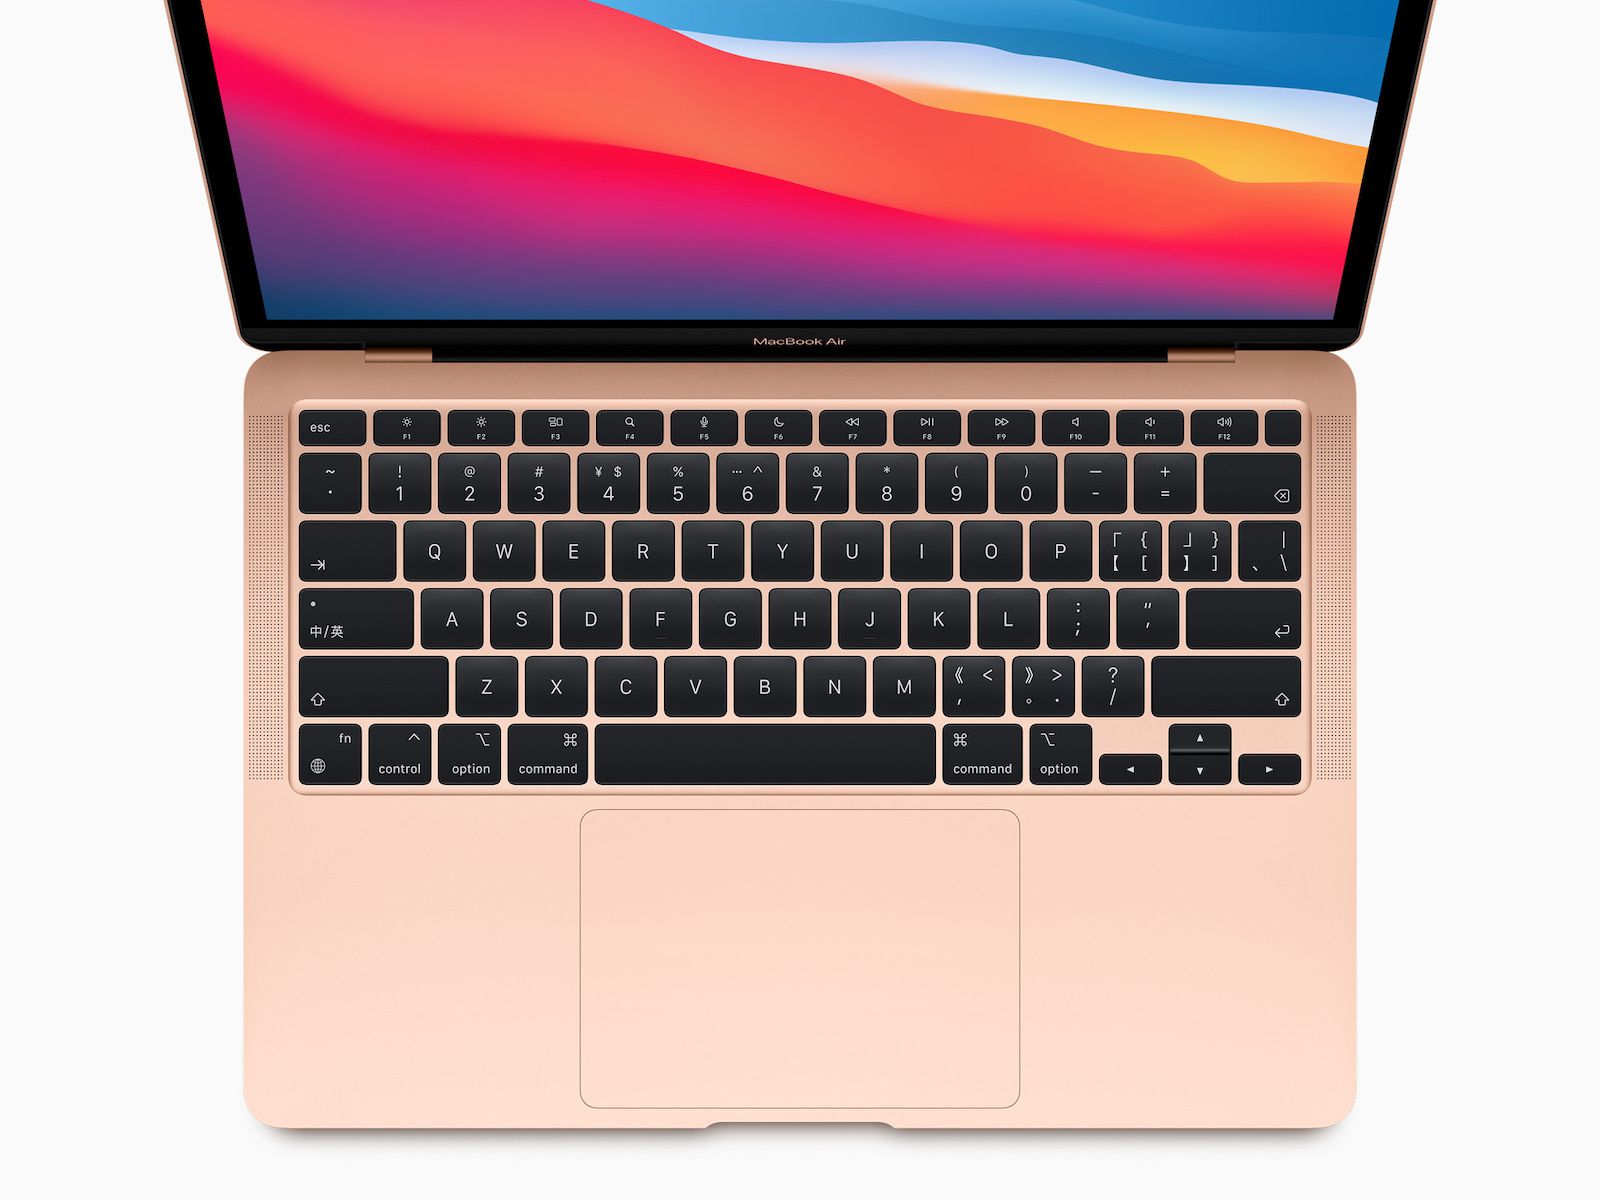 New MacBook Air Announced as First Apple Silicon Mac With M1 Chip